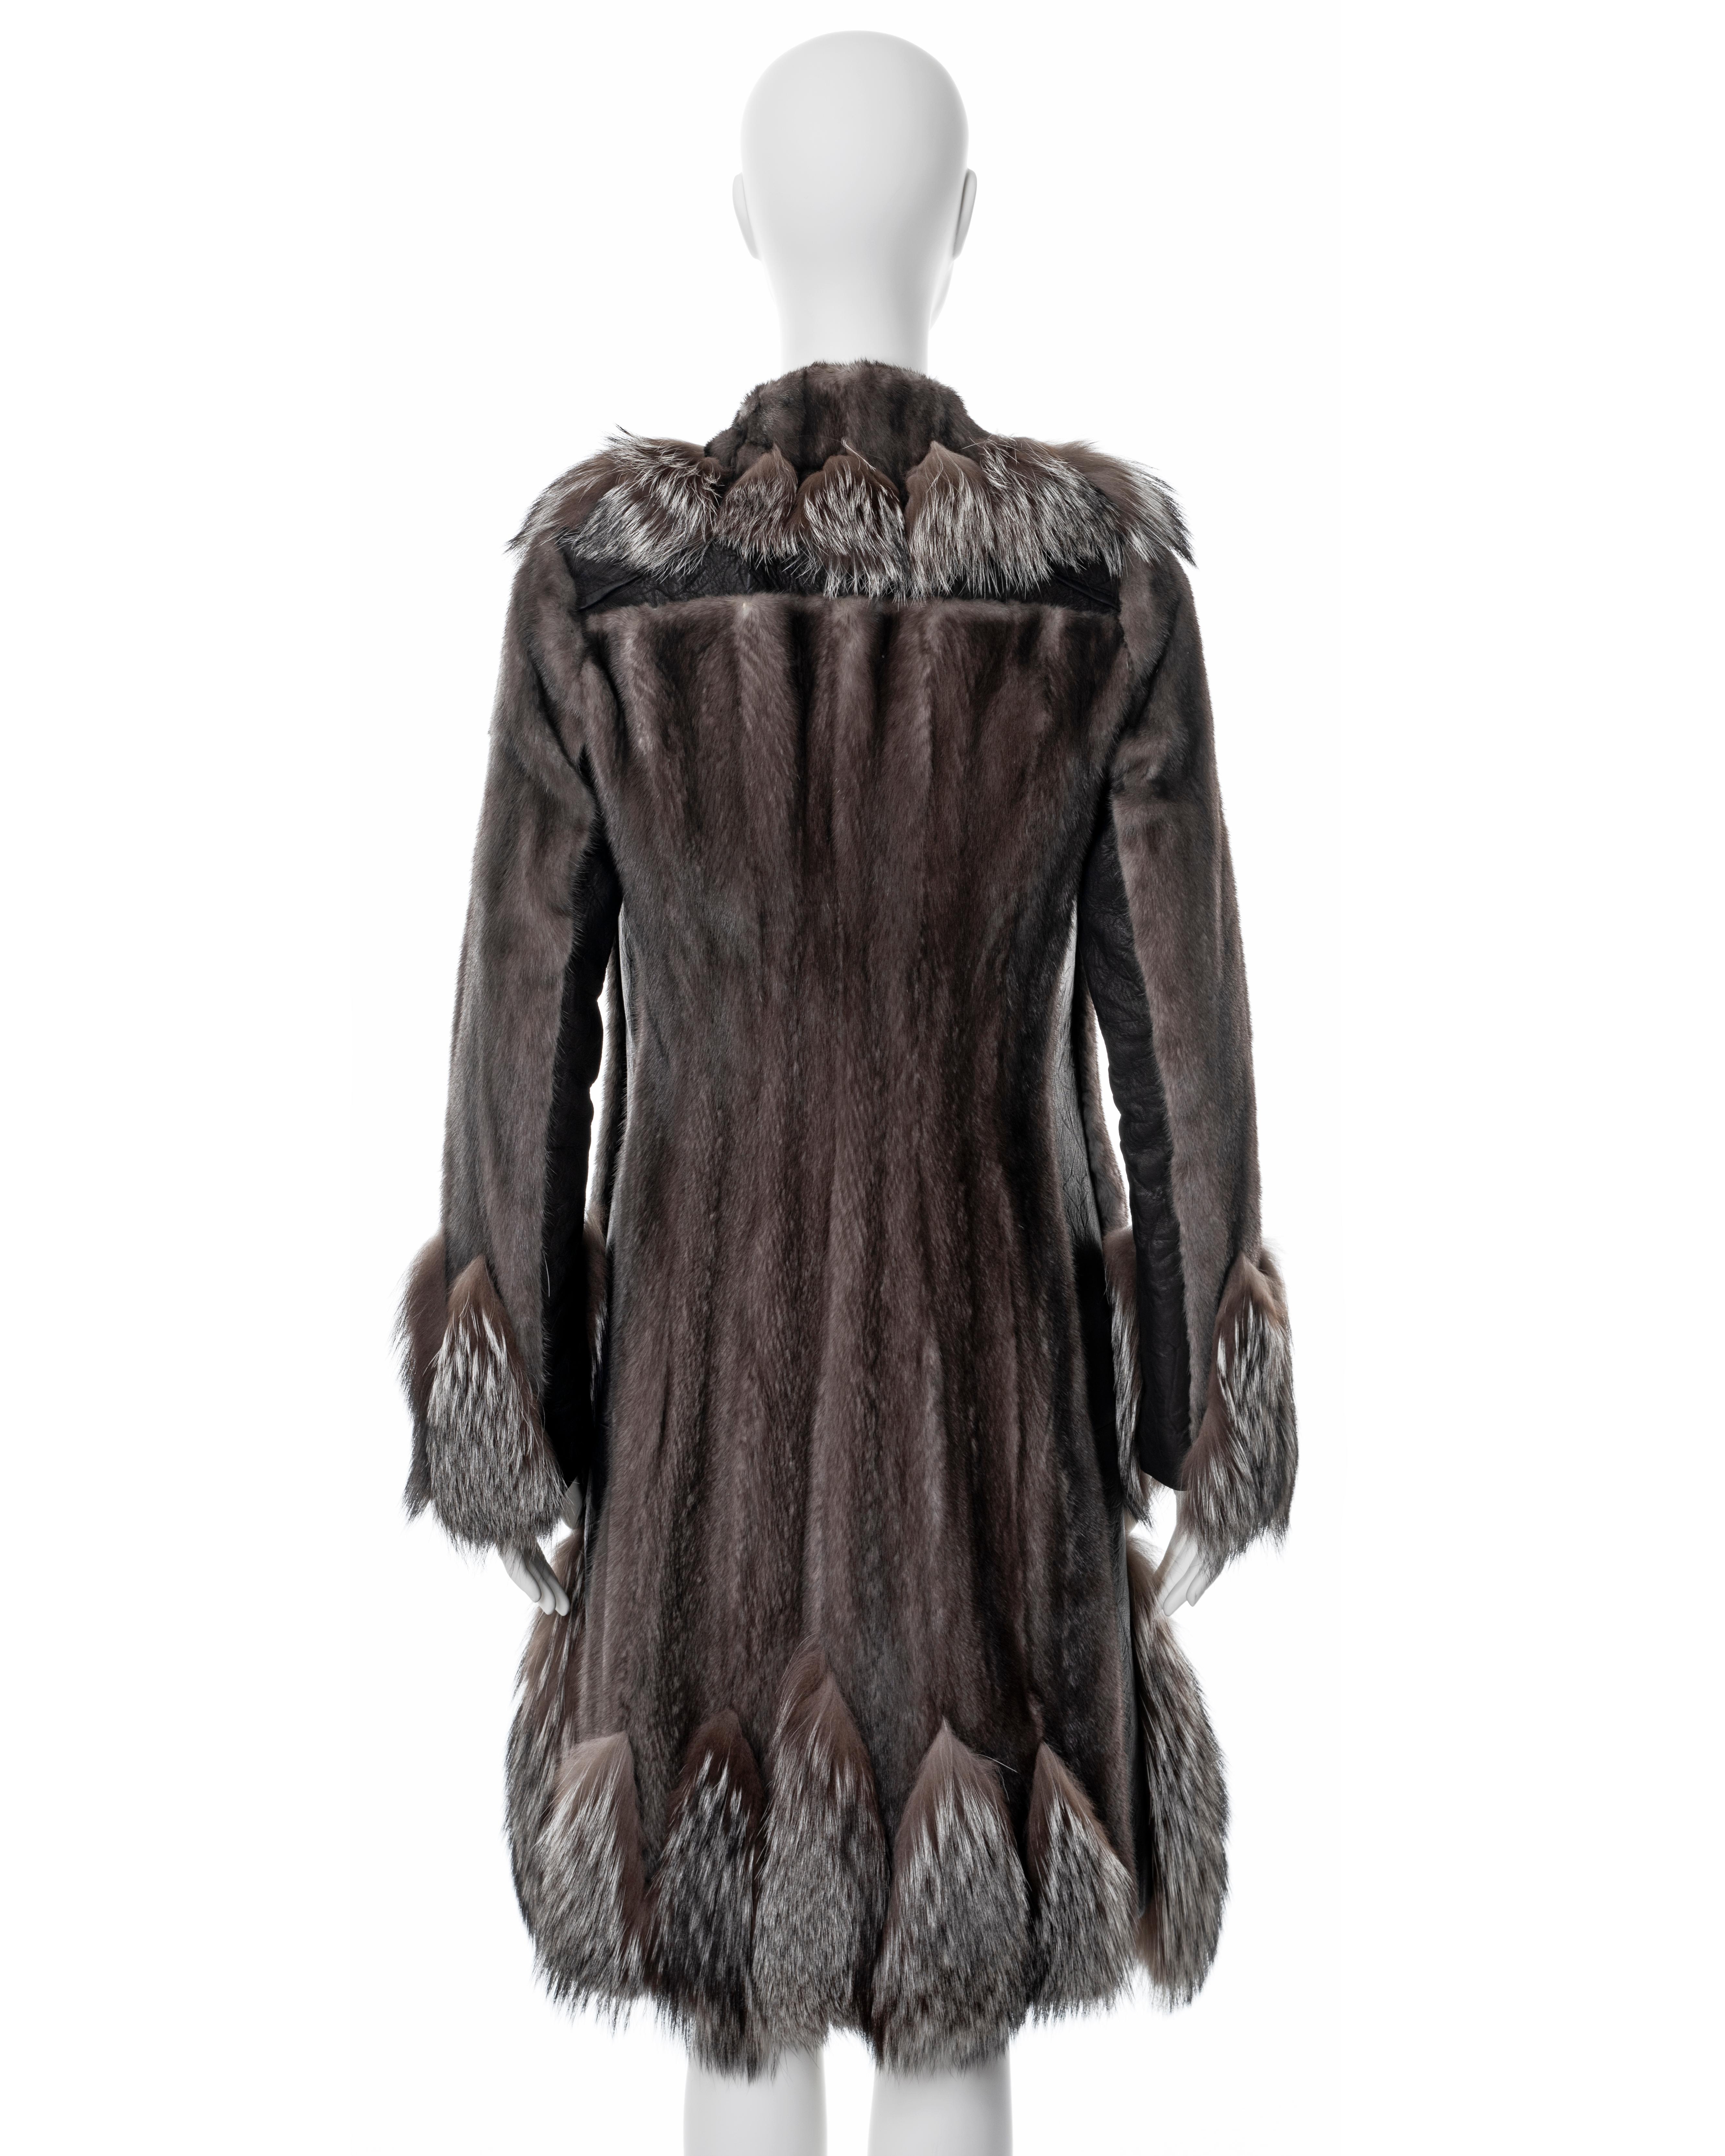 Christian Dior by John Galliano silverblue mink and silver fox fur coat, fw 2006 For Sale 4